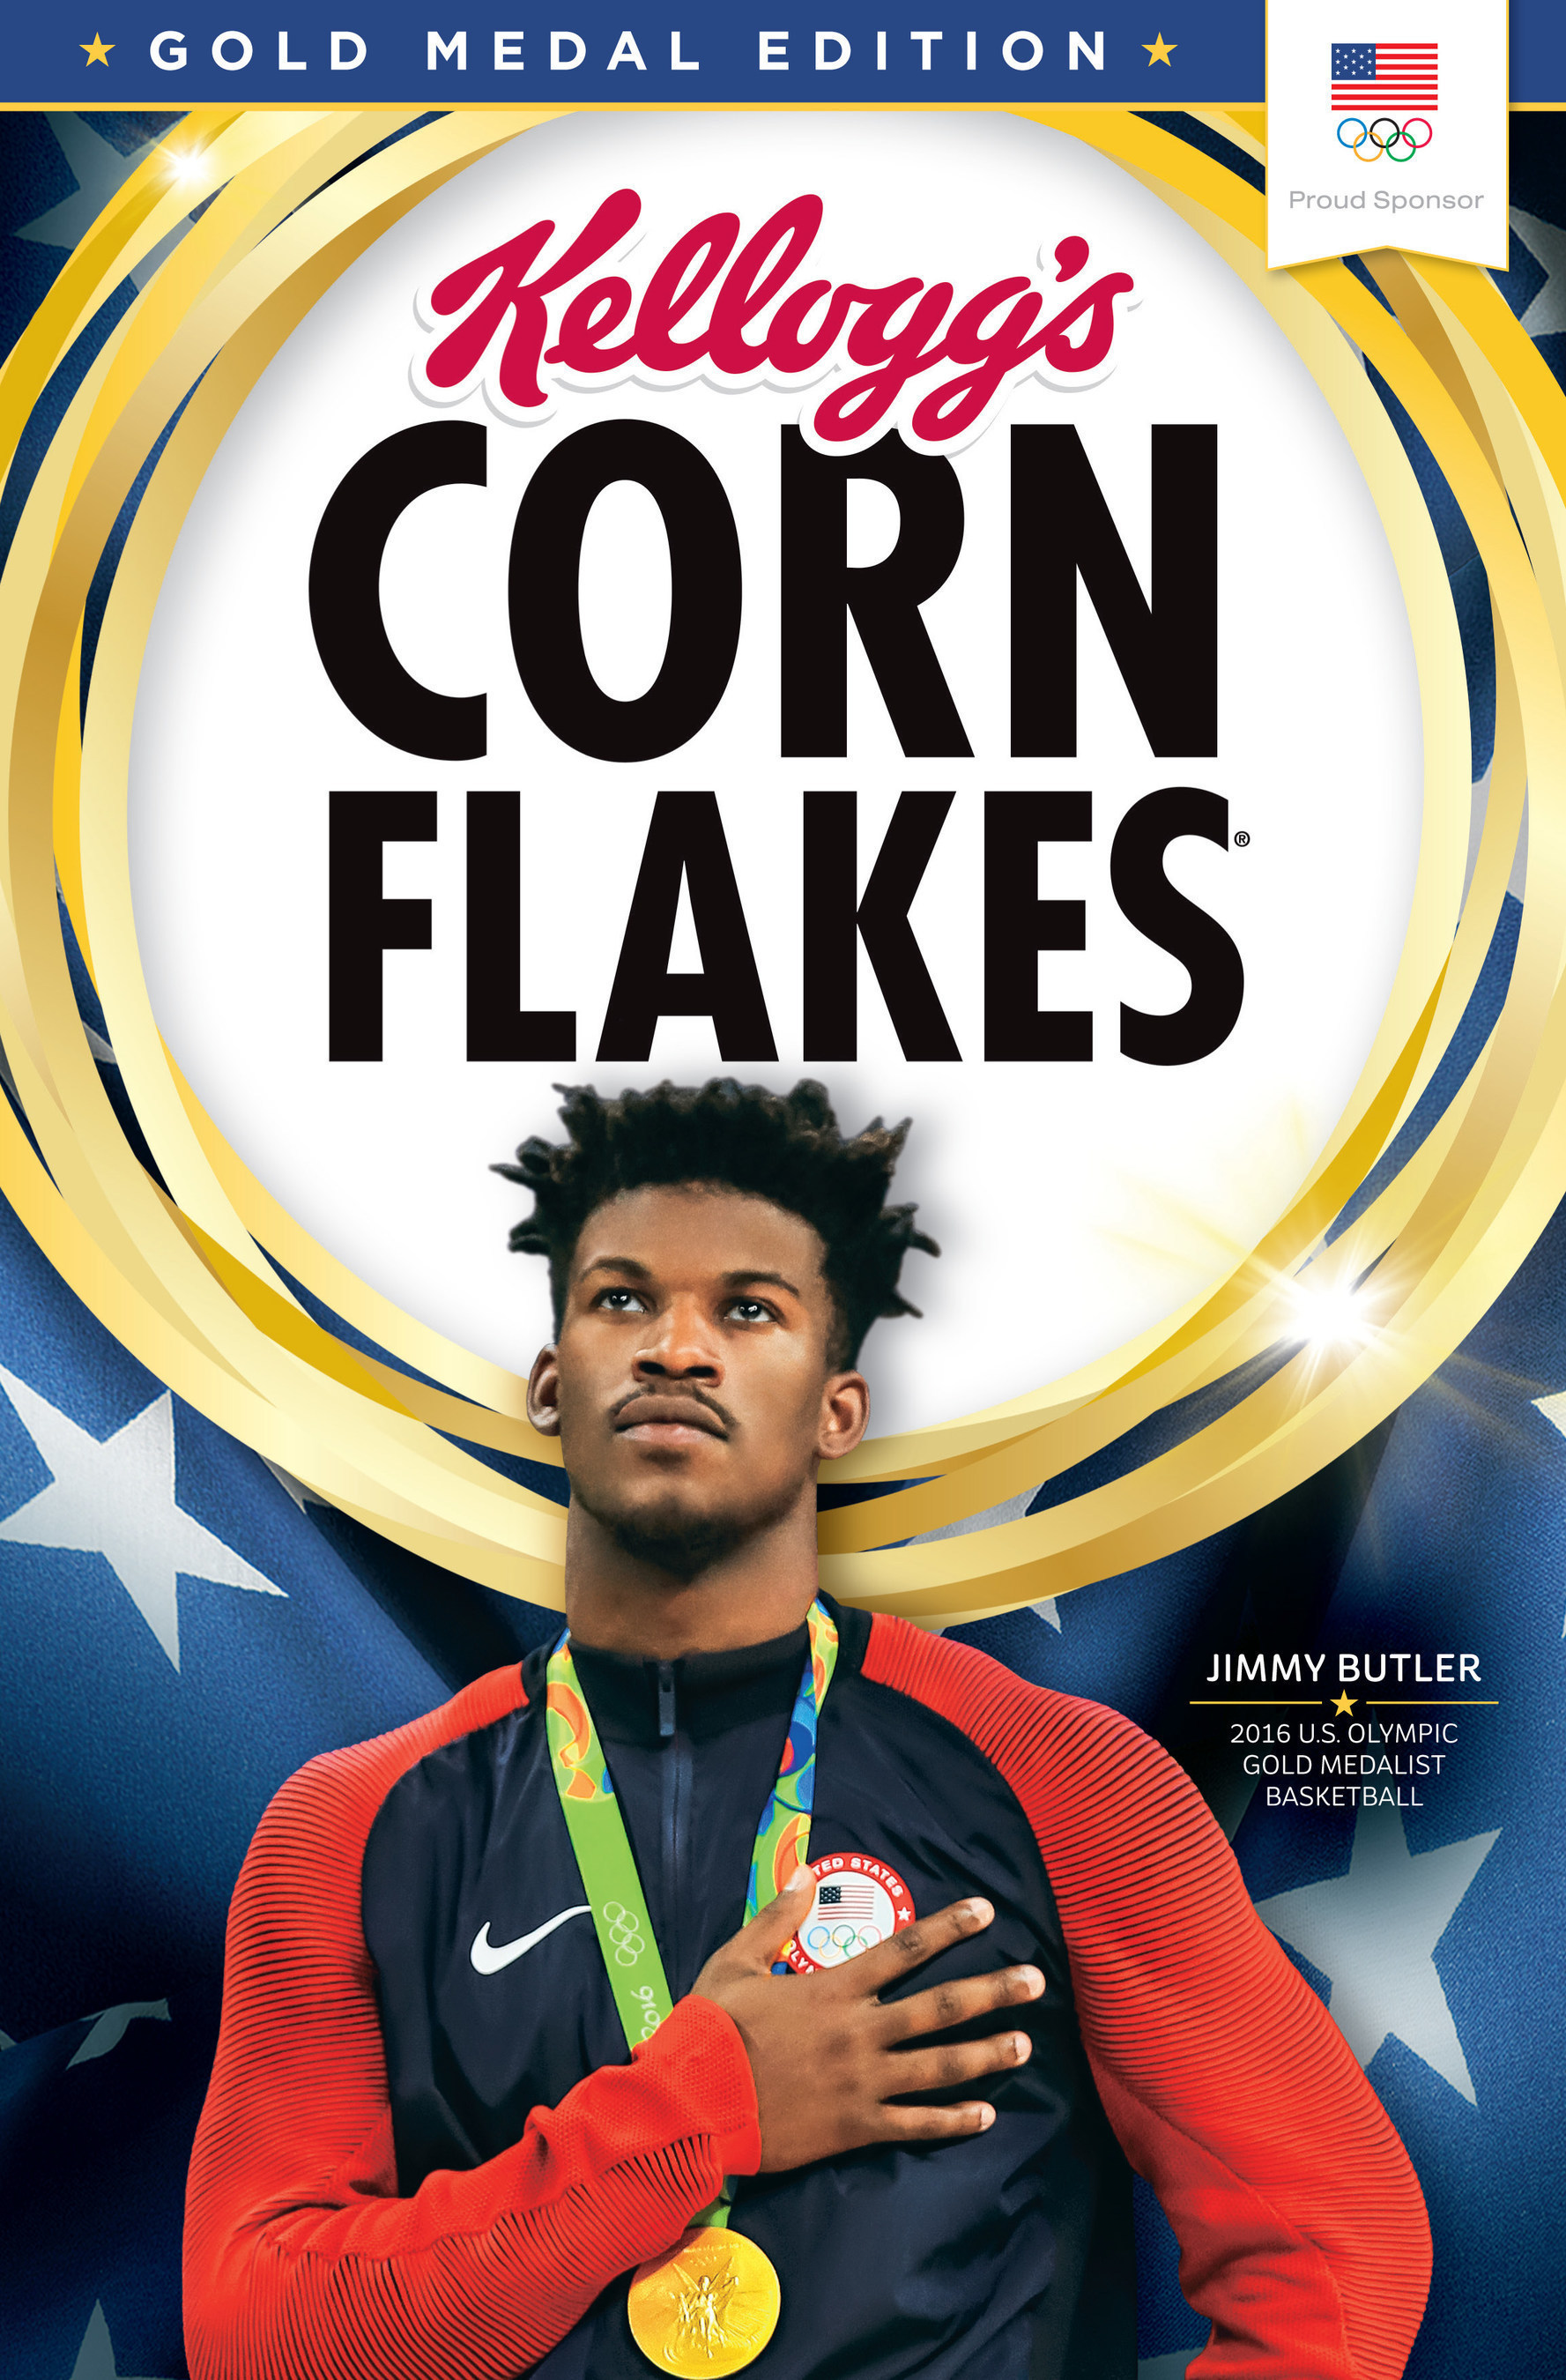 Jimmy Butler of Team Kellogg's is being featured on gold medal edition boxes of Kellogg's Corn Flakes. #GetsMeStarted